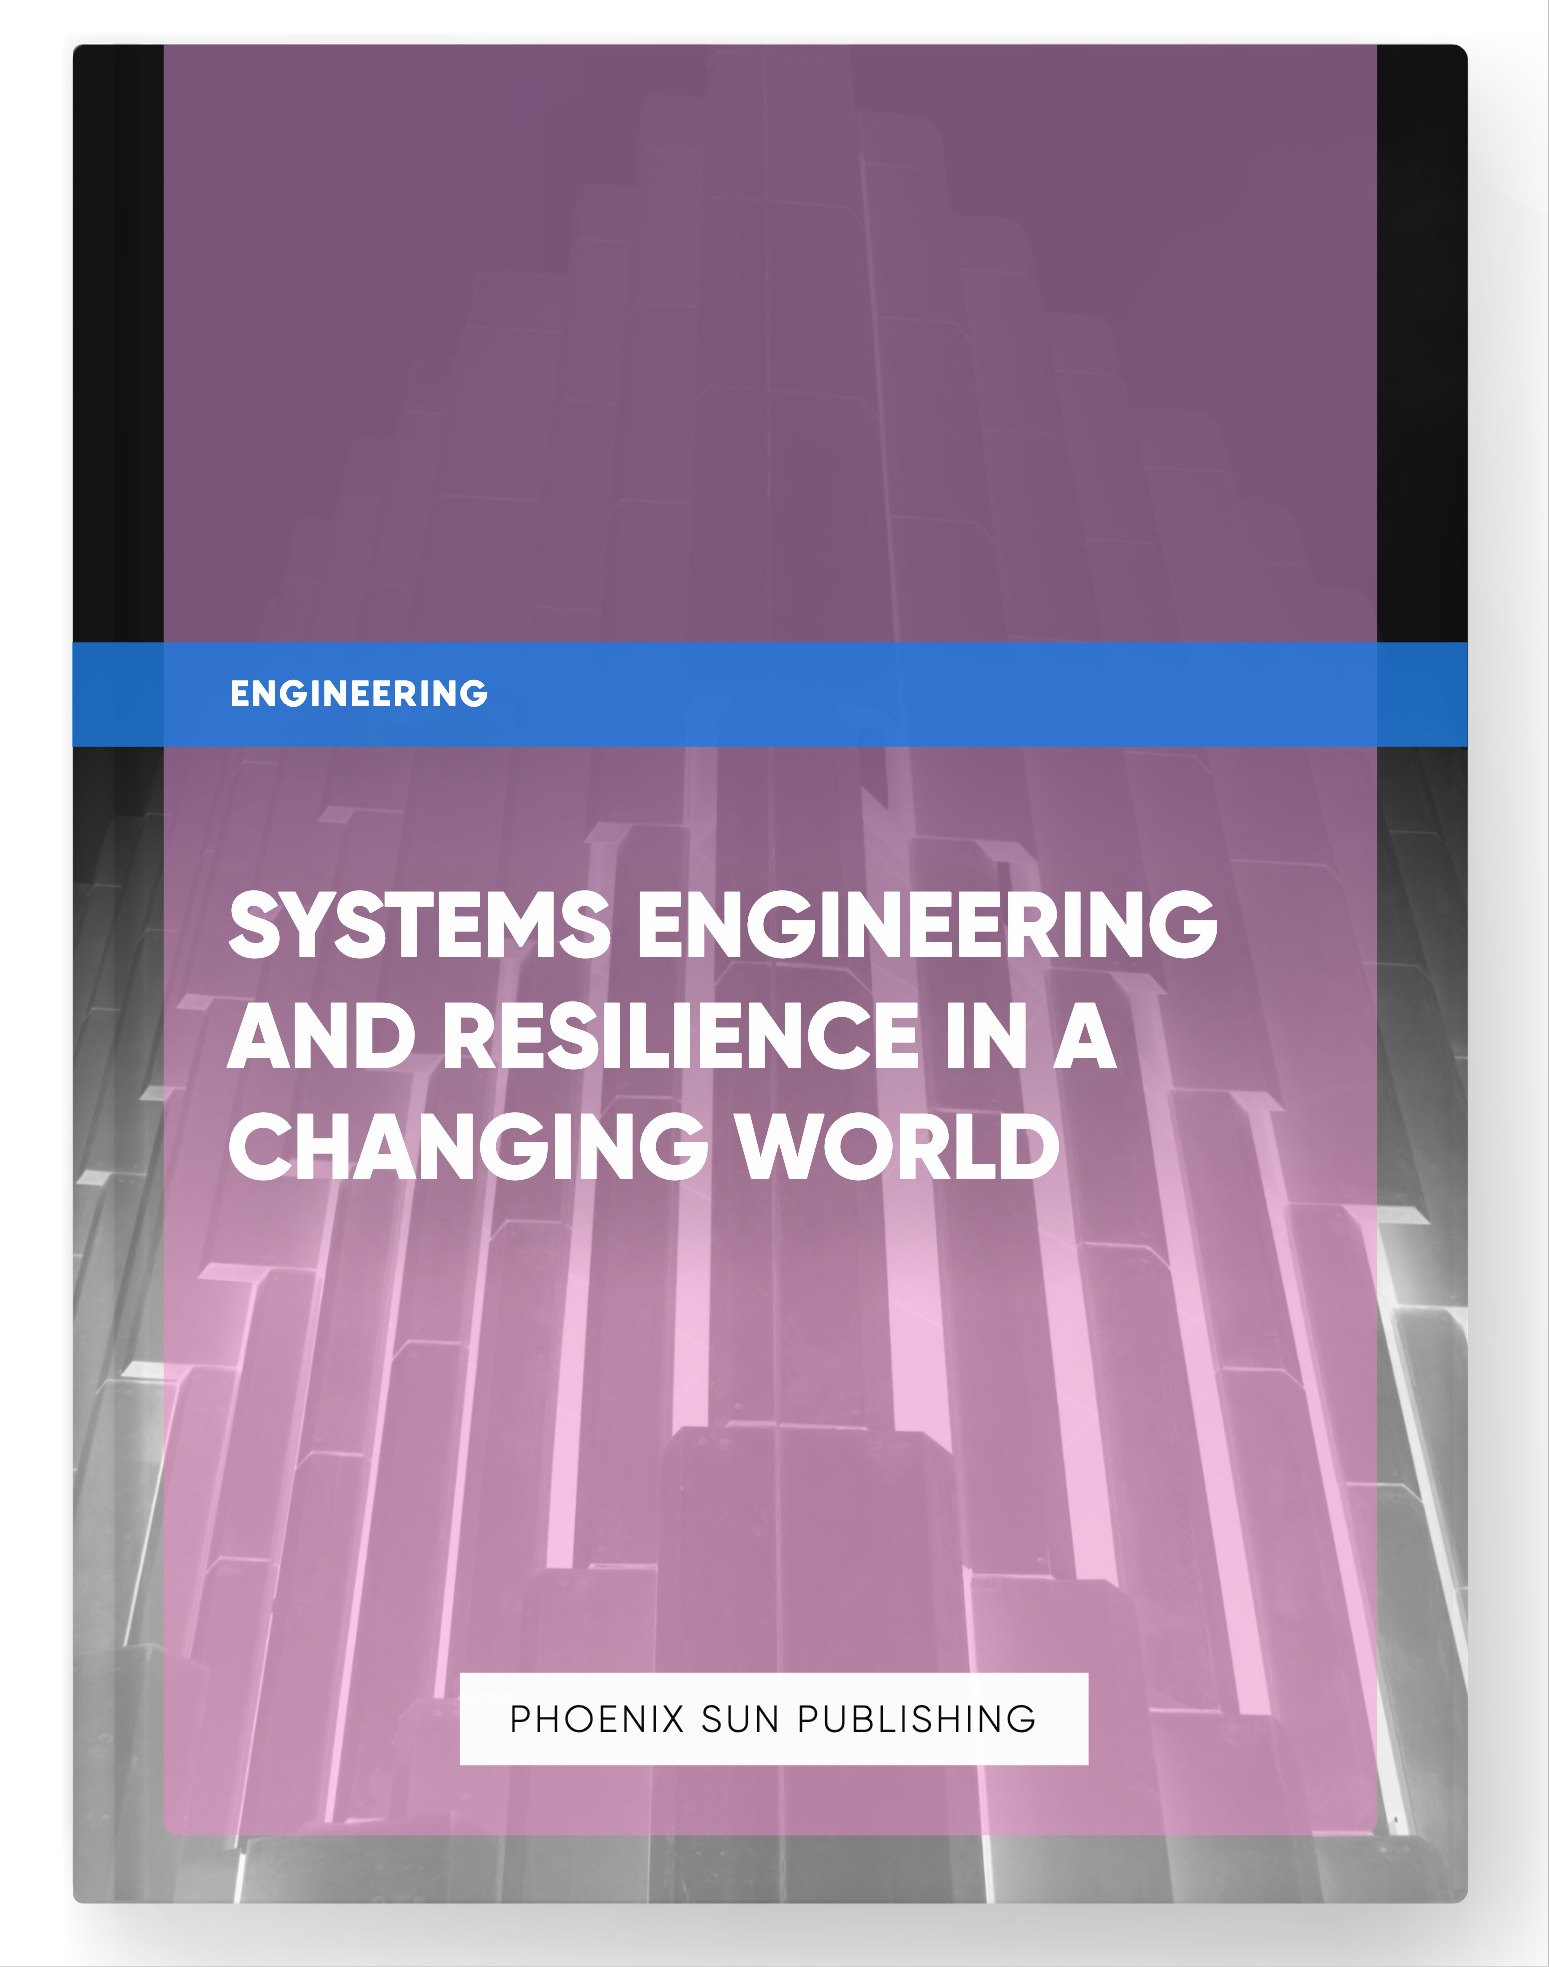 Systems Engineering and Resilience in a Changing World